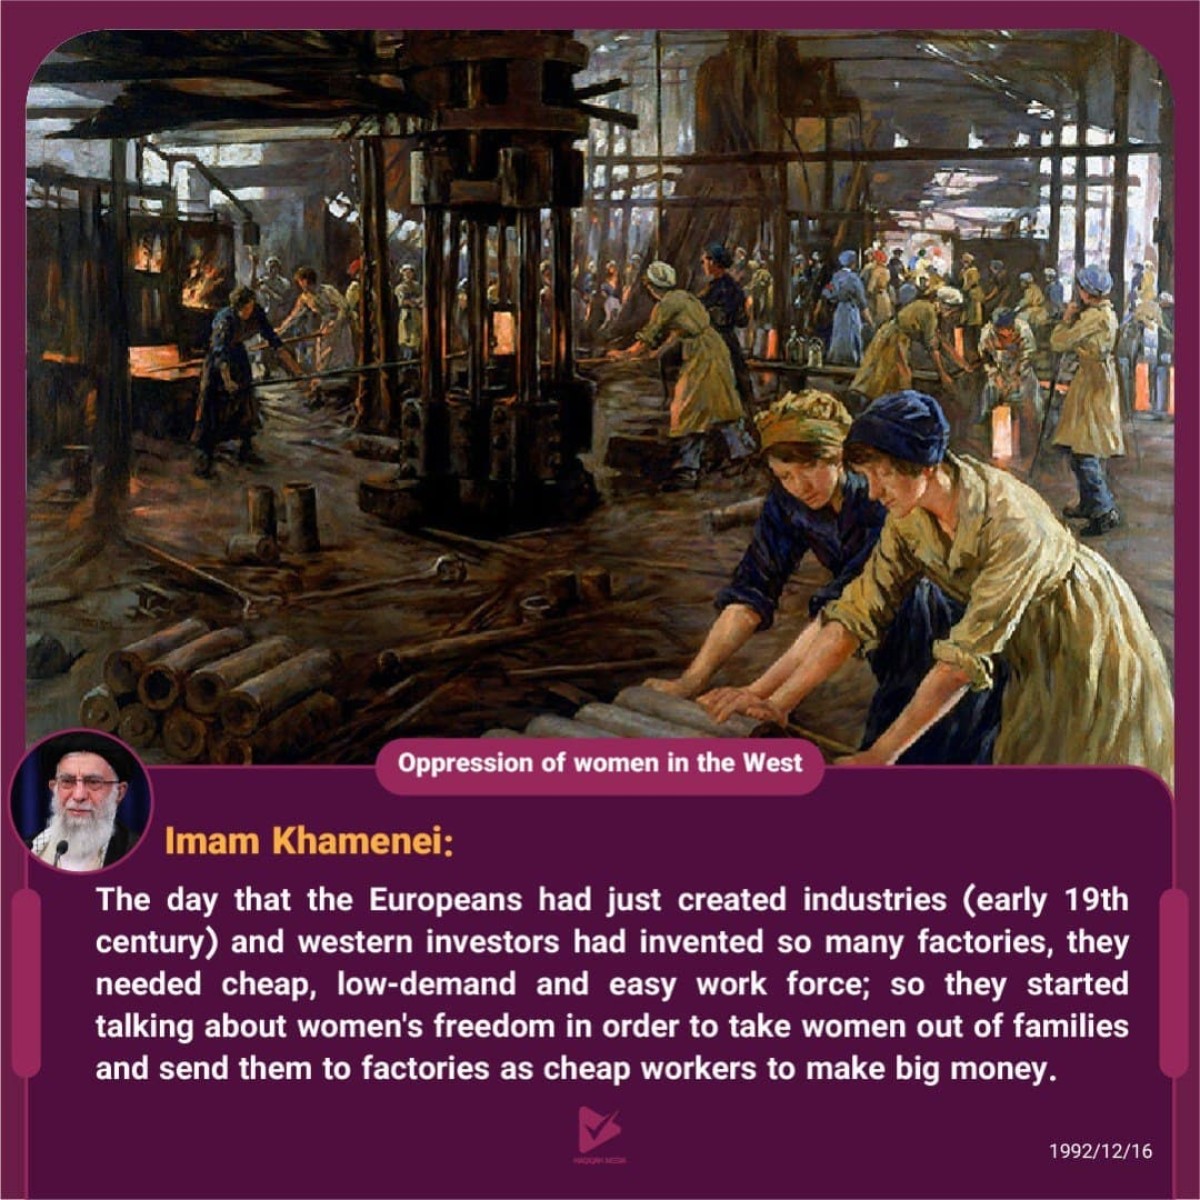 The day that the Europeans had just created industries